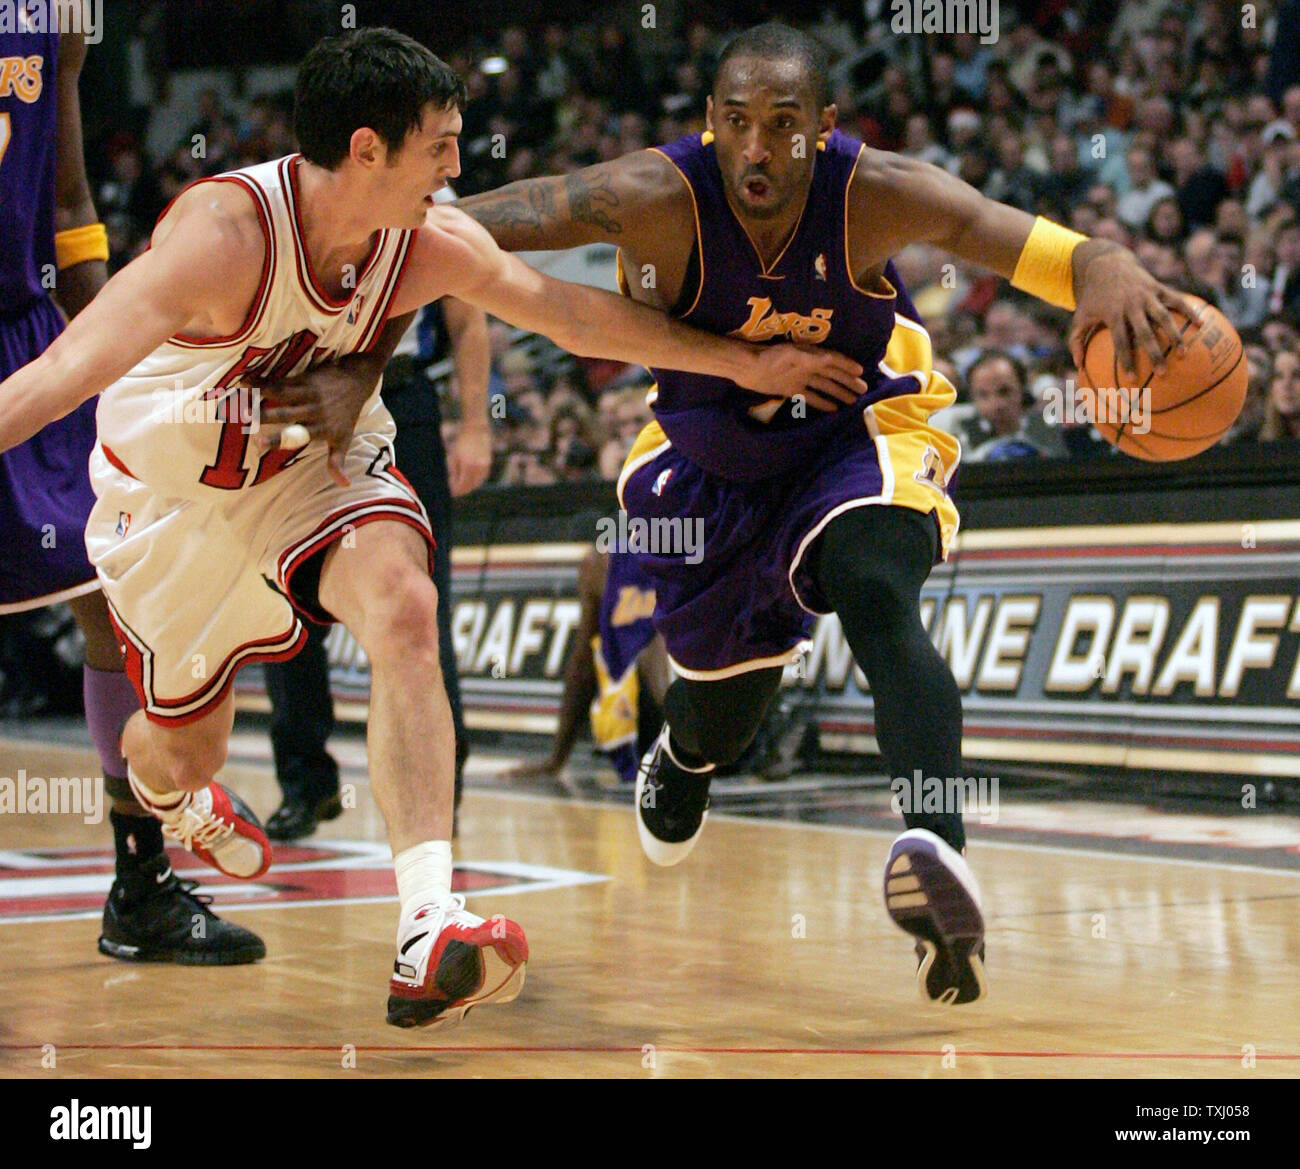 Los Angeles Lakers Kobe Bryant (R), drives on Chicago Bulls' Kirk Hinrich during the fourth quarter on December 9, 2005, in Chicago. The Lakers won 93-80. (UPI Photo/Brian Kersey) Stock Photo